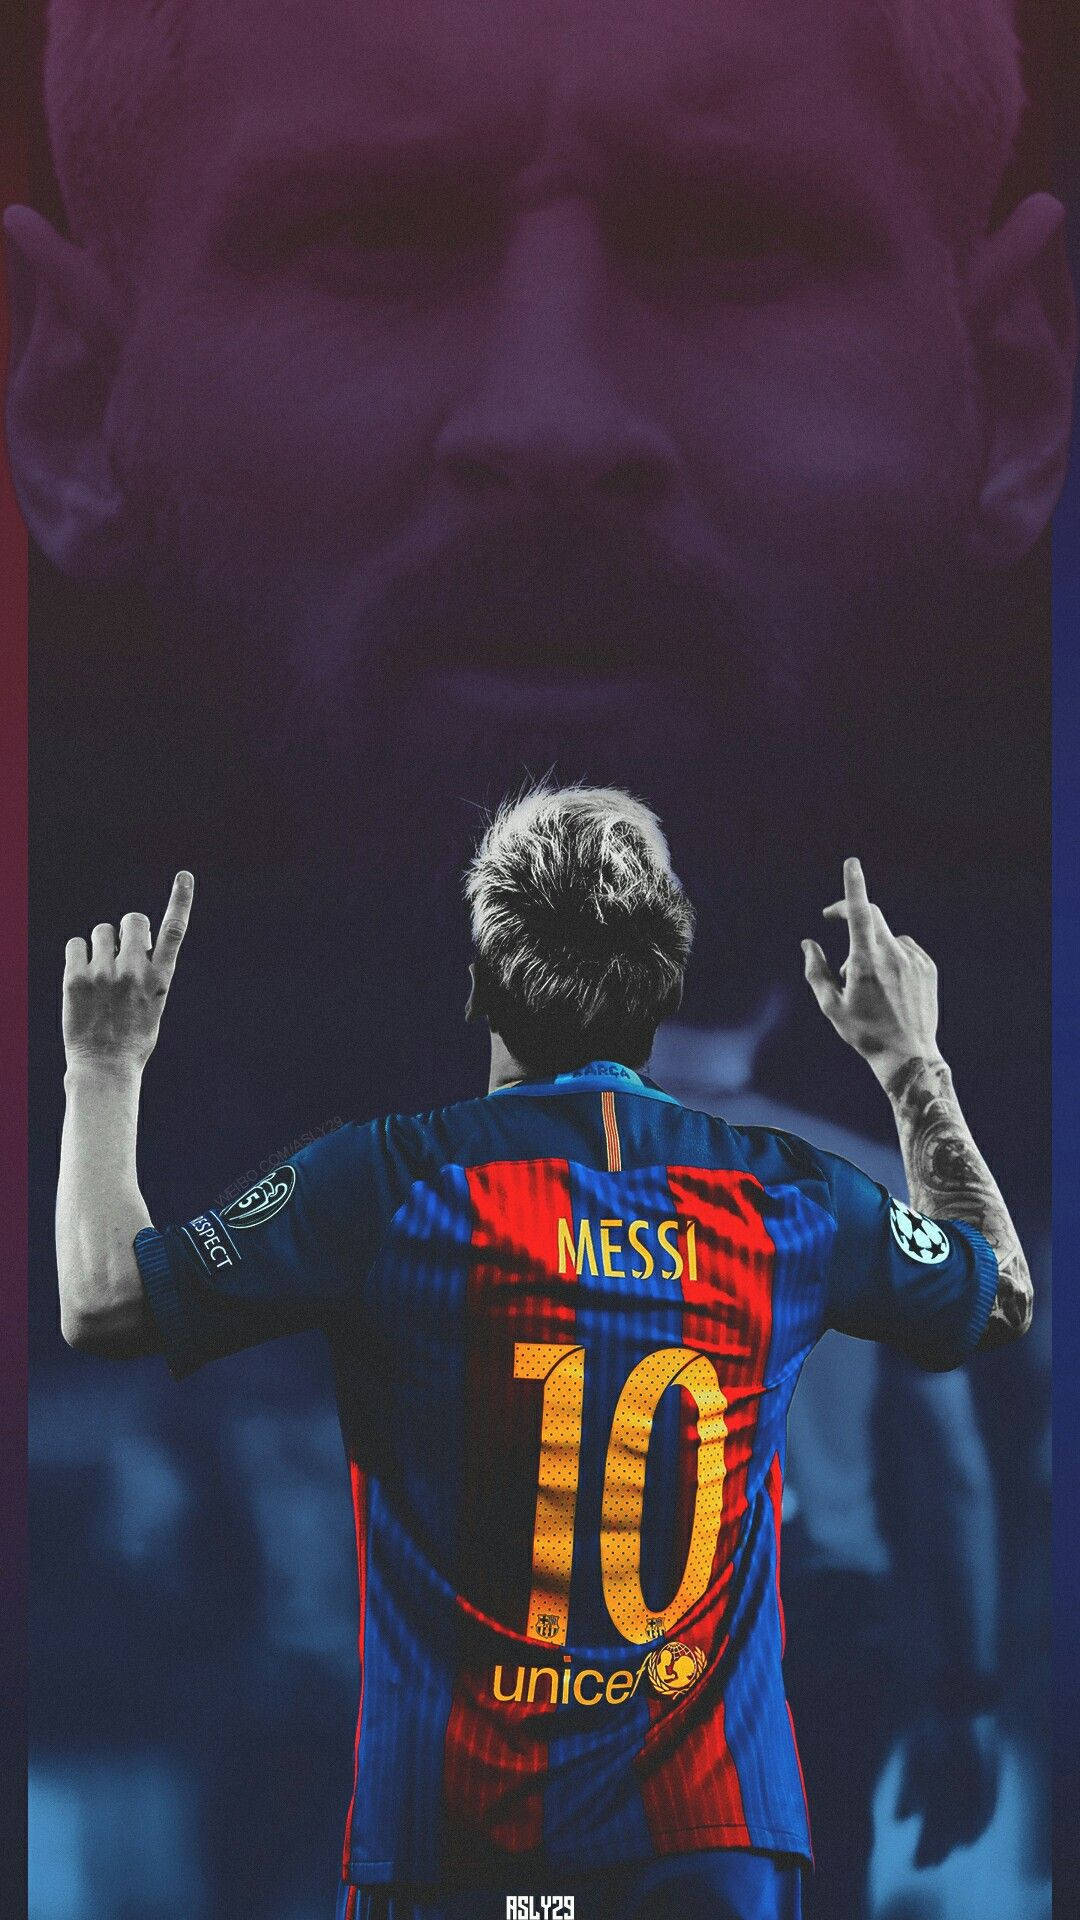 King Messi Pointing Up